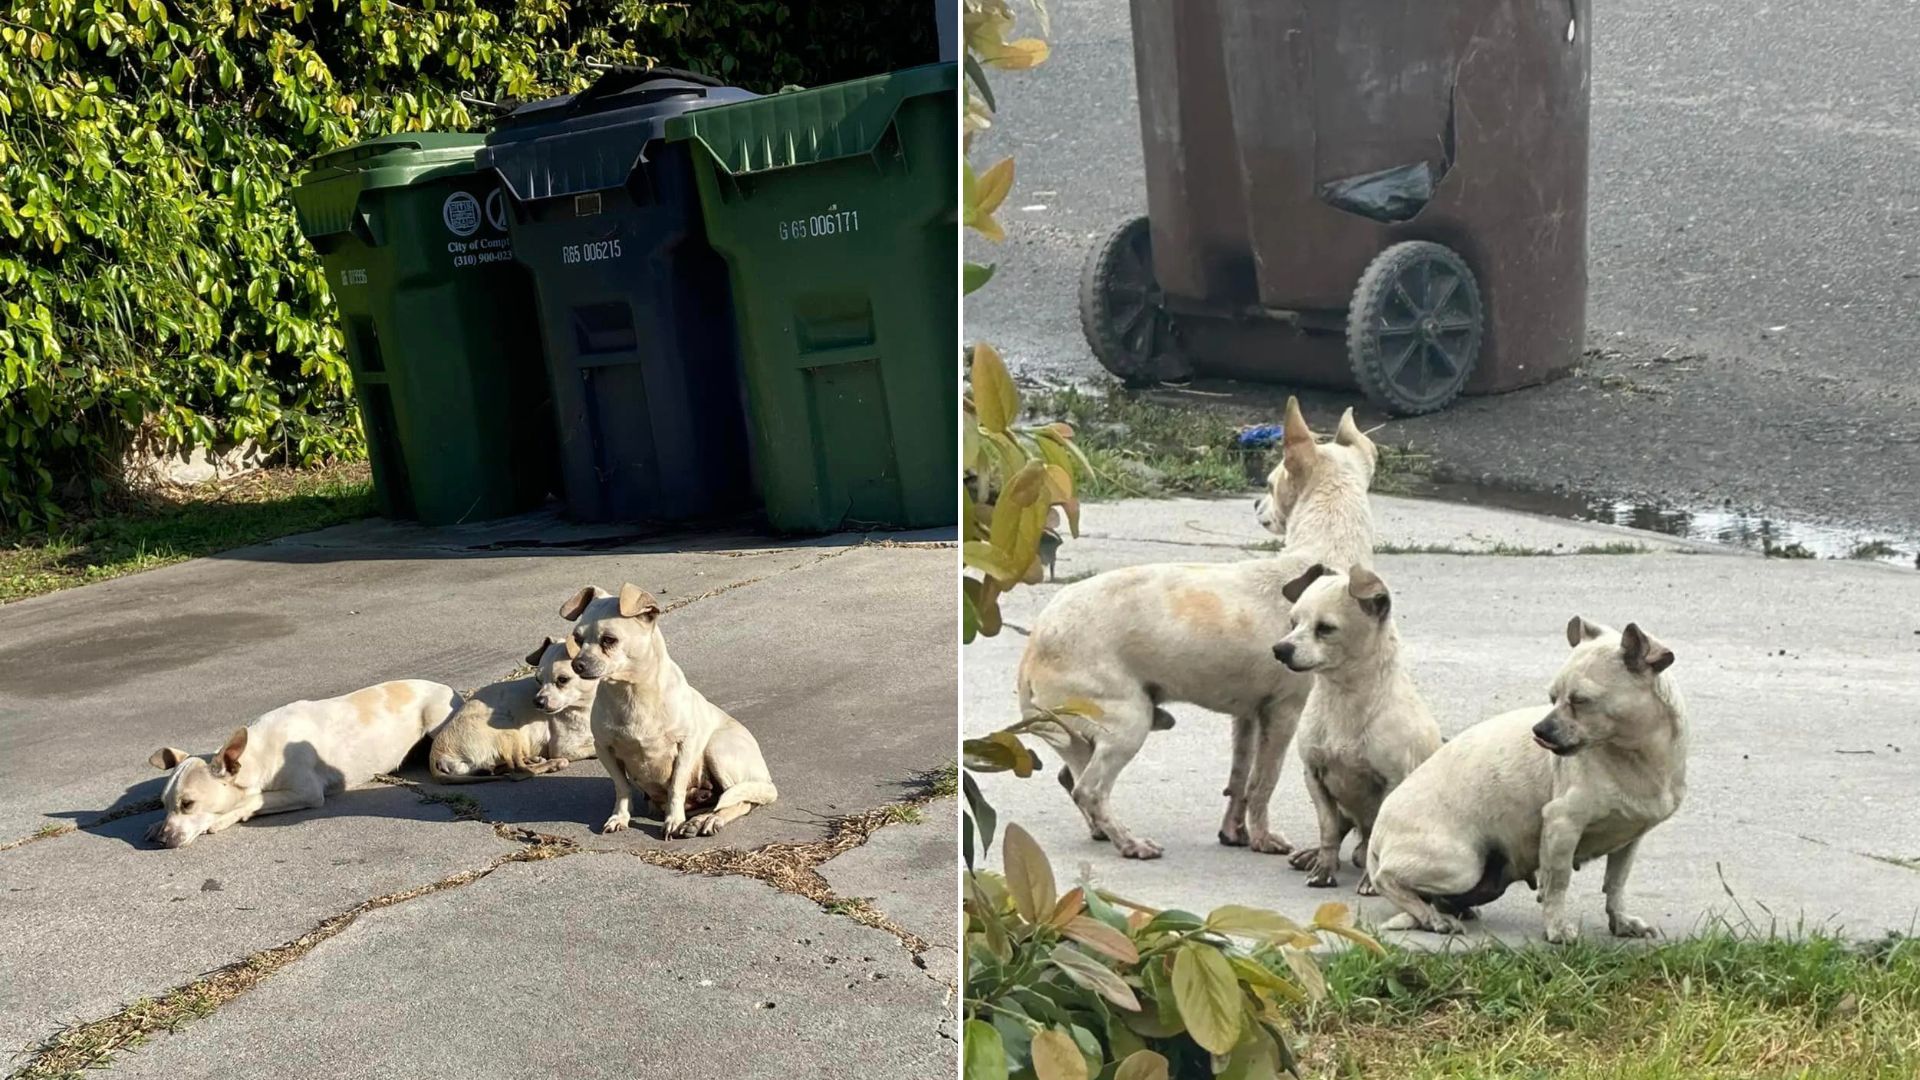 These 3 Abandoned Puppies Were Completely Inseparable Until An Amazing Person Came To Their Rescue